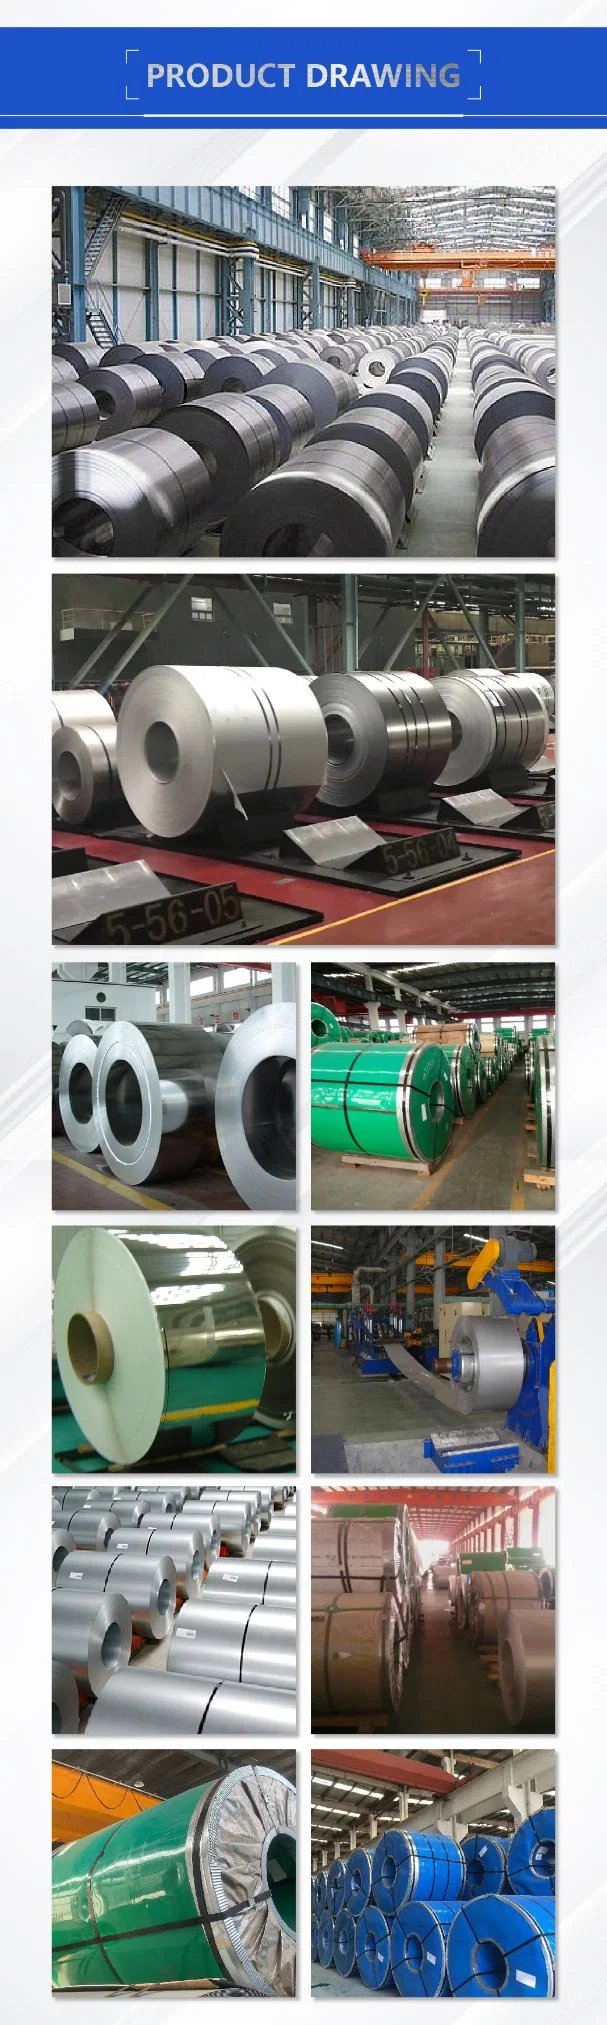 ASTM A36 Carbon Steel Sheet Mild Carbon Steel Plate Cold Rolled Ms Galvanized Price A572 Gr50